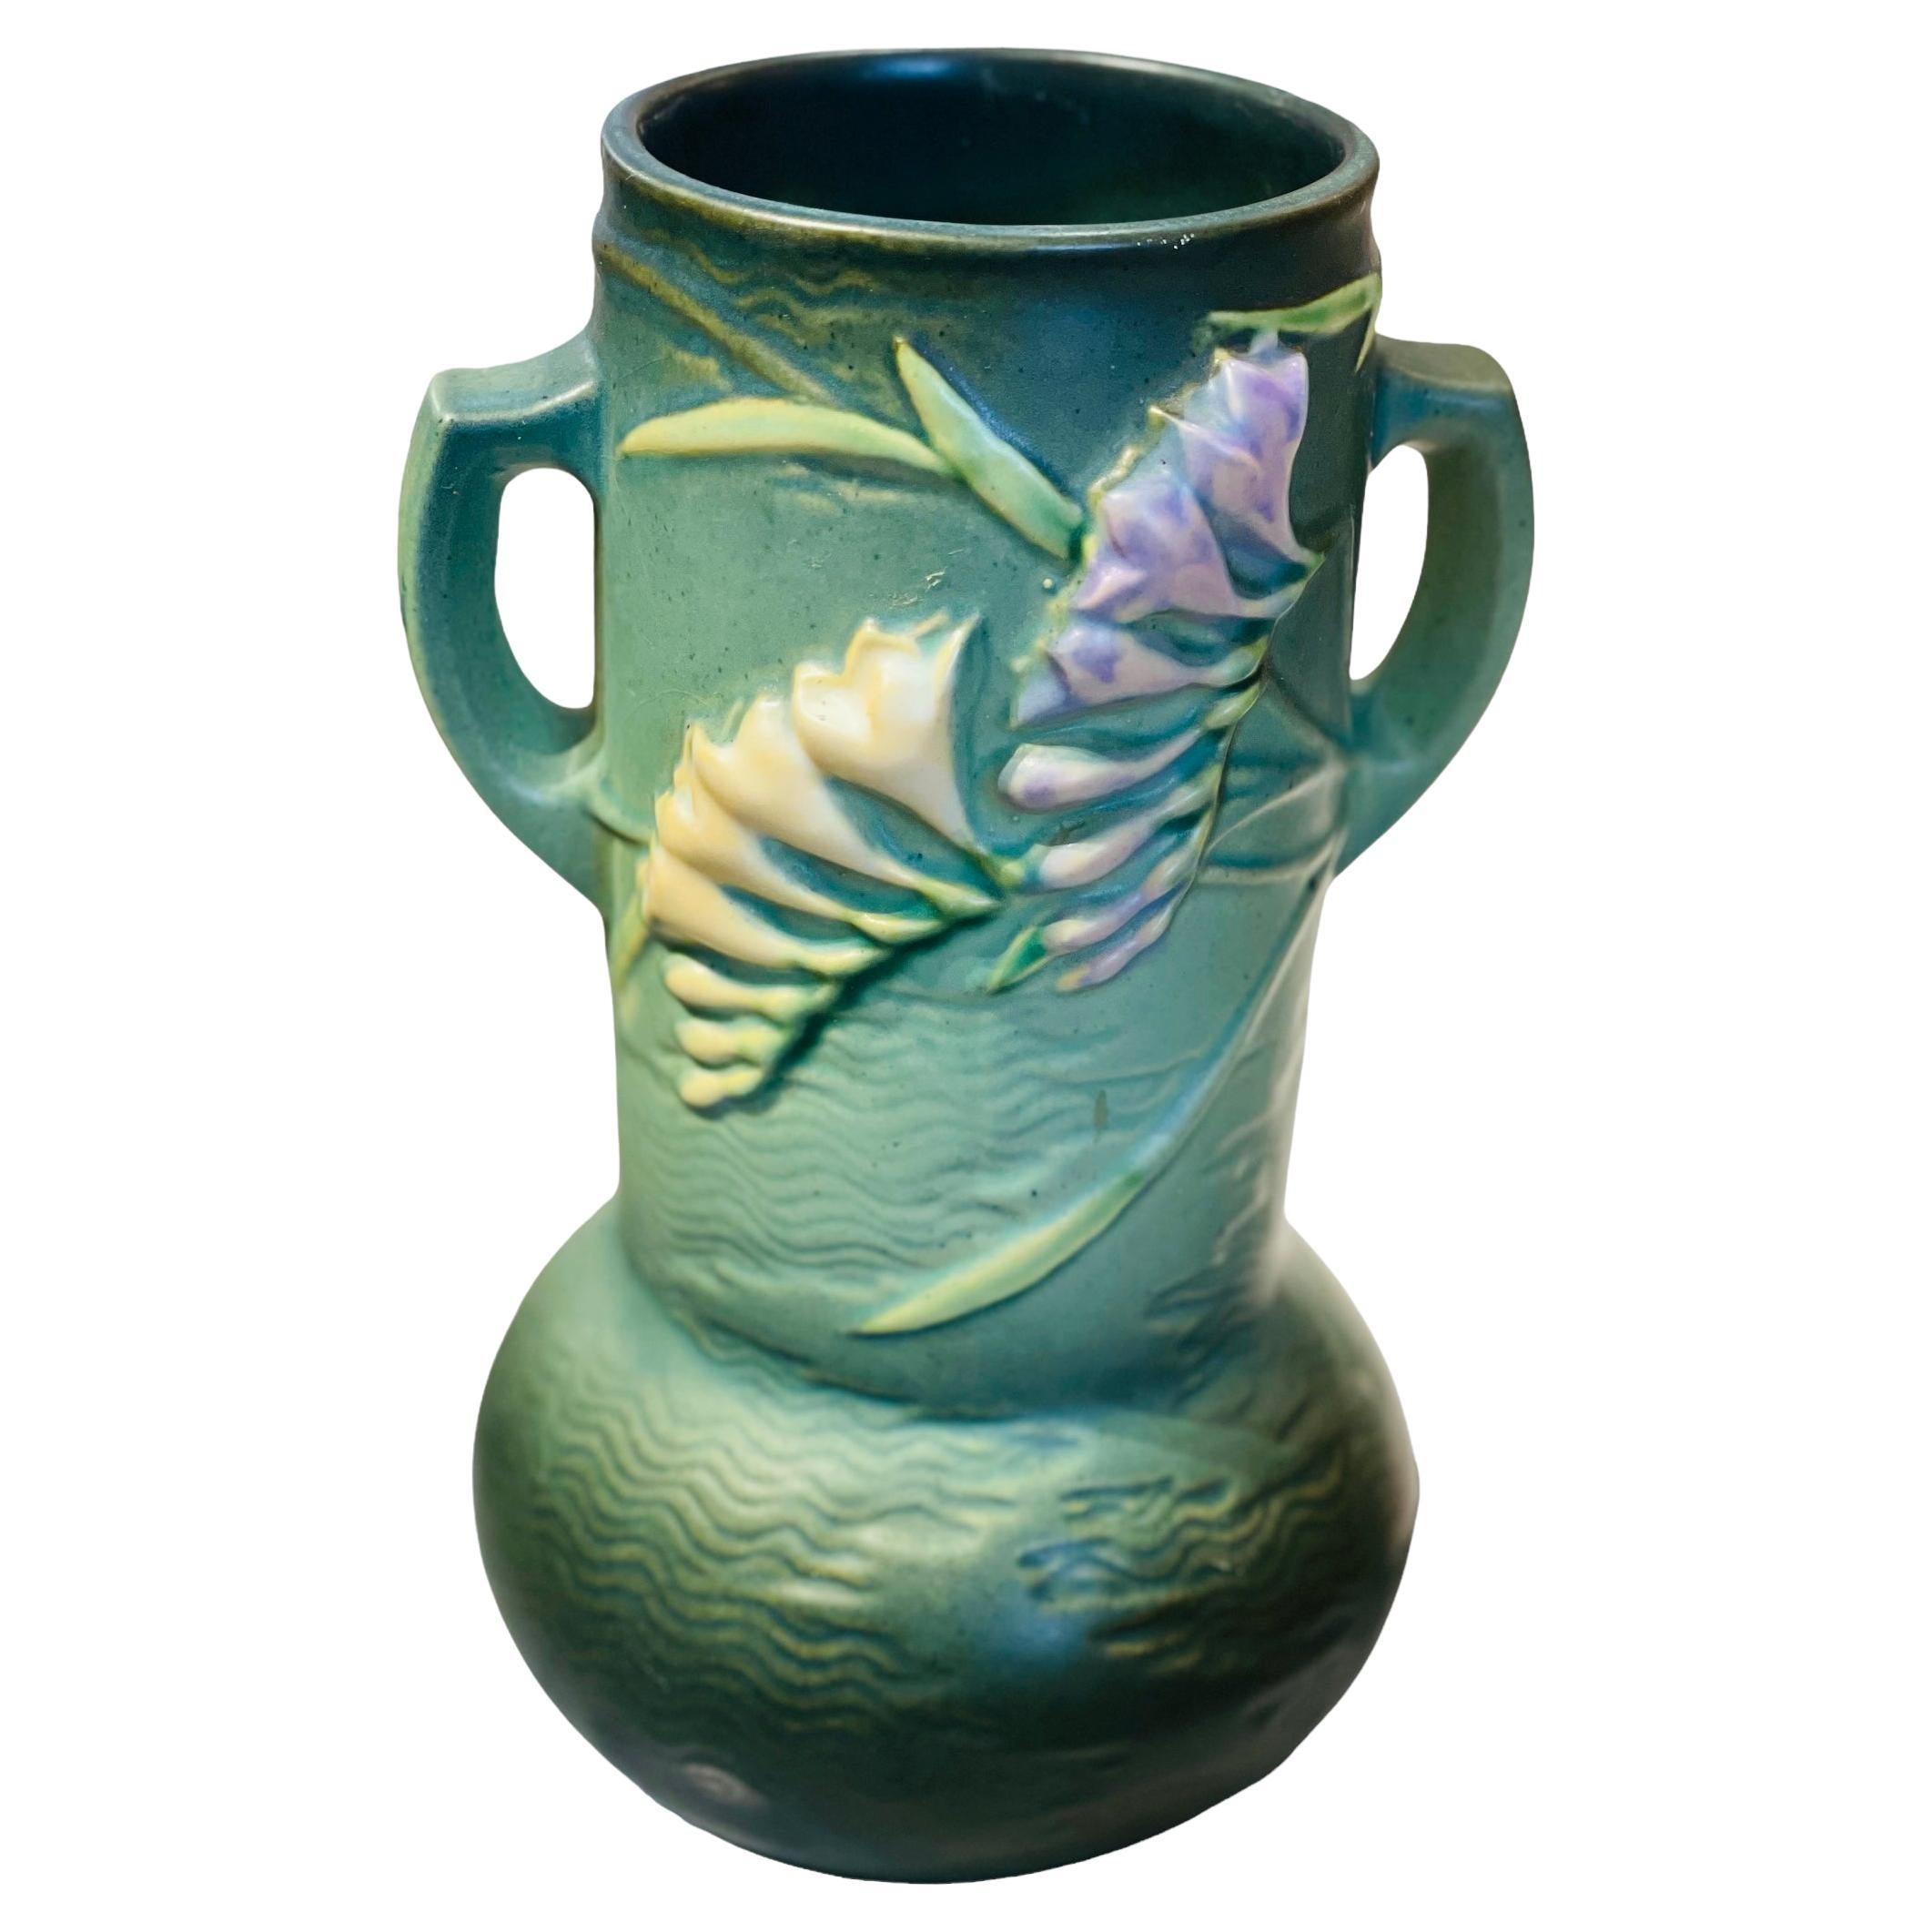 This is a green turquoise cylindrical bulbous shaped Roseville vase. It is decorated with a relief of long green leaves & branches of Freesia flowers in the back and front. The upper border is round shaped. Two D-shaped handles come out from the